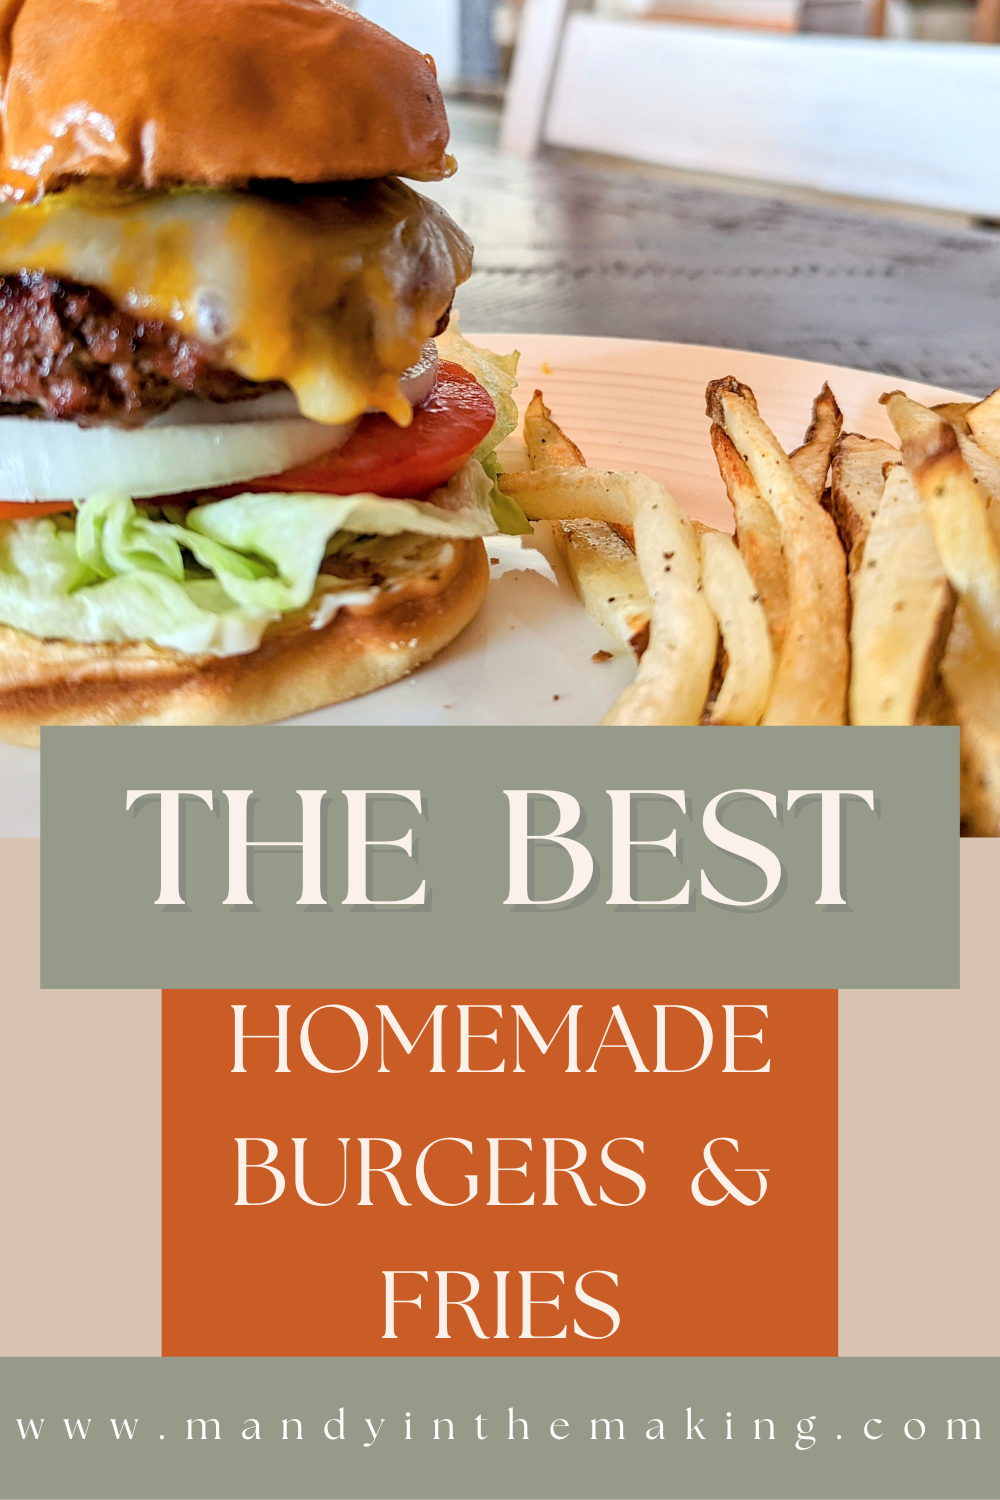 The best Burgers and Fries — Mandy in the Making | Meals & More on YouTube